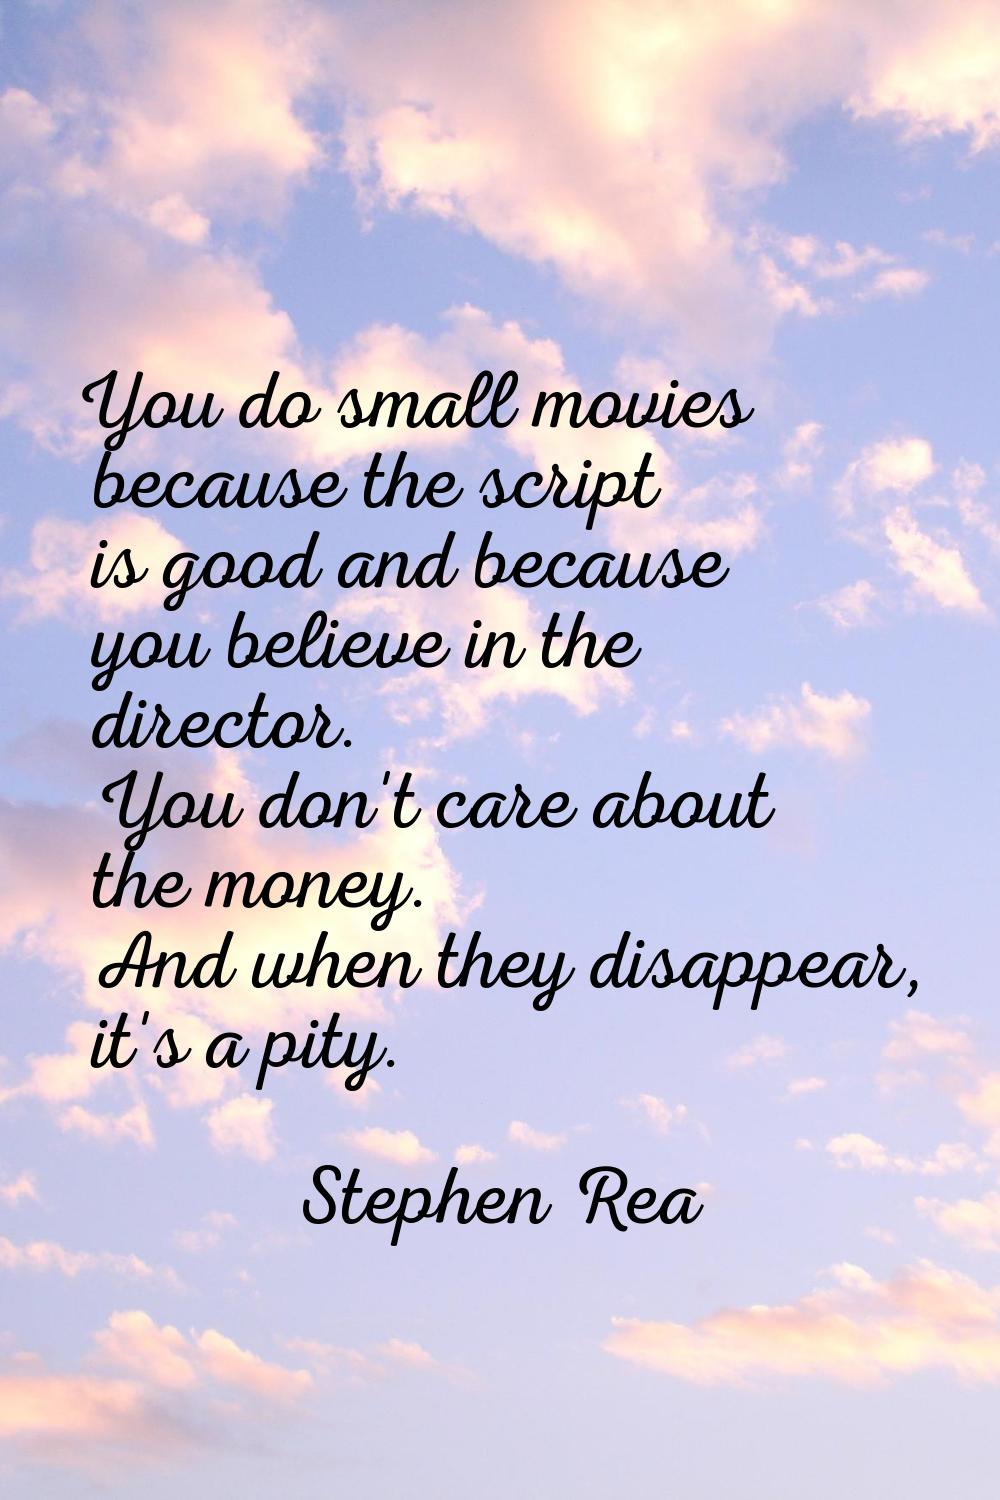 You do small movies because the script is good and because you believe in the director. You don't c